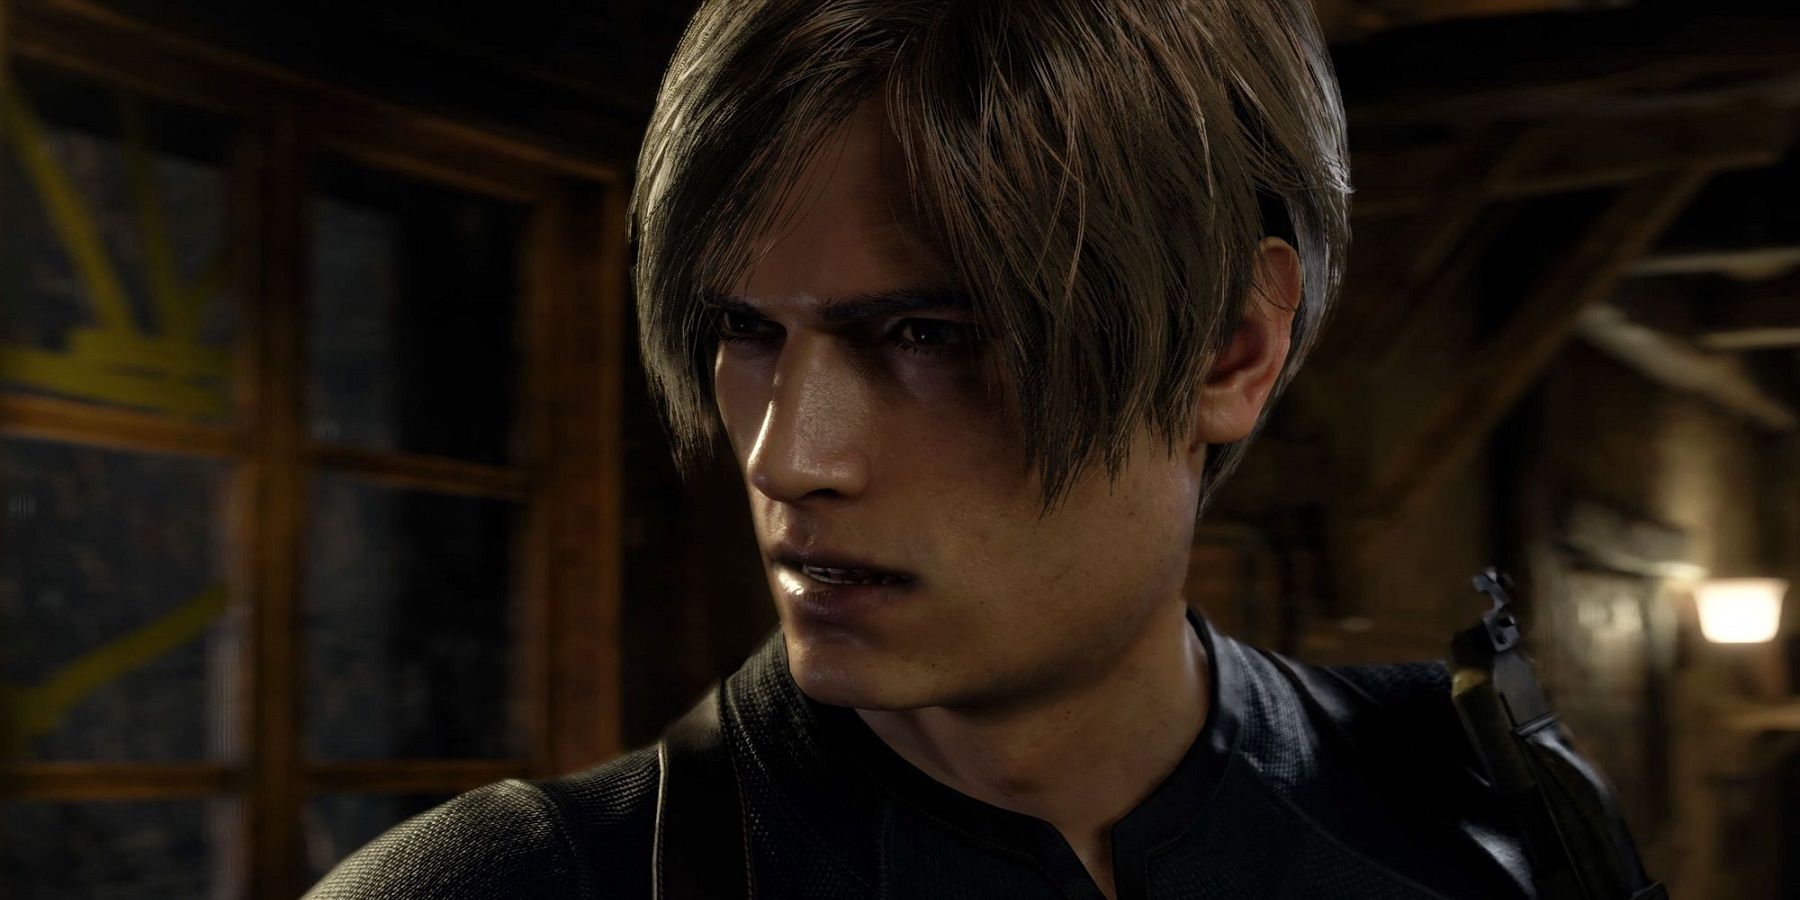 Resident Evil 4 remake cast, all voice actors & how you know them